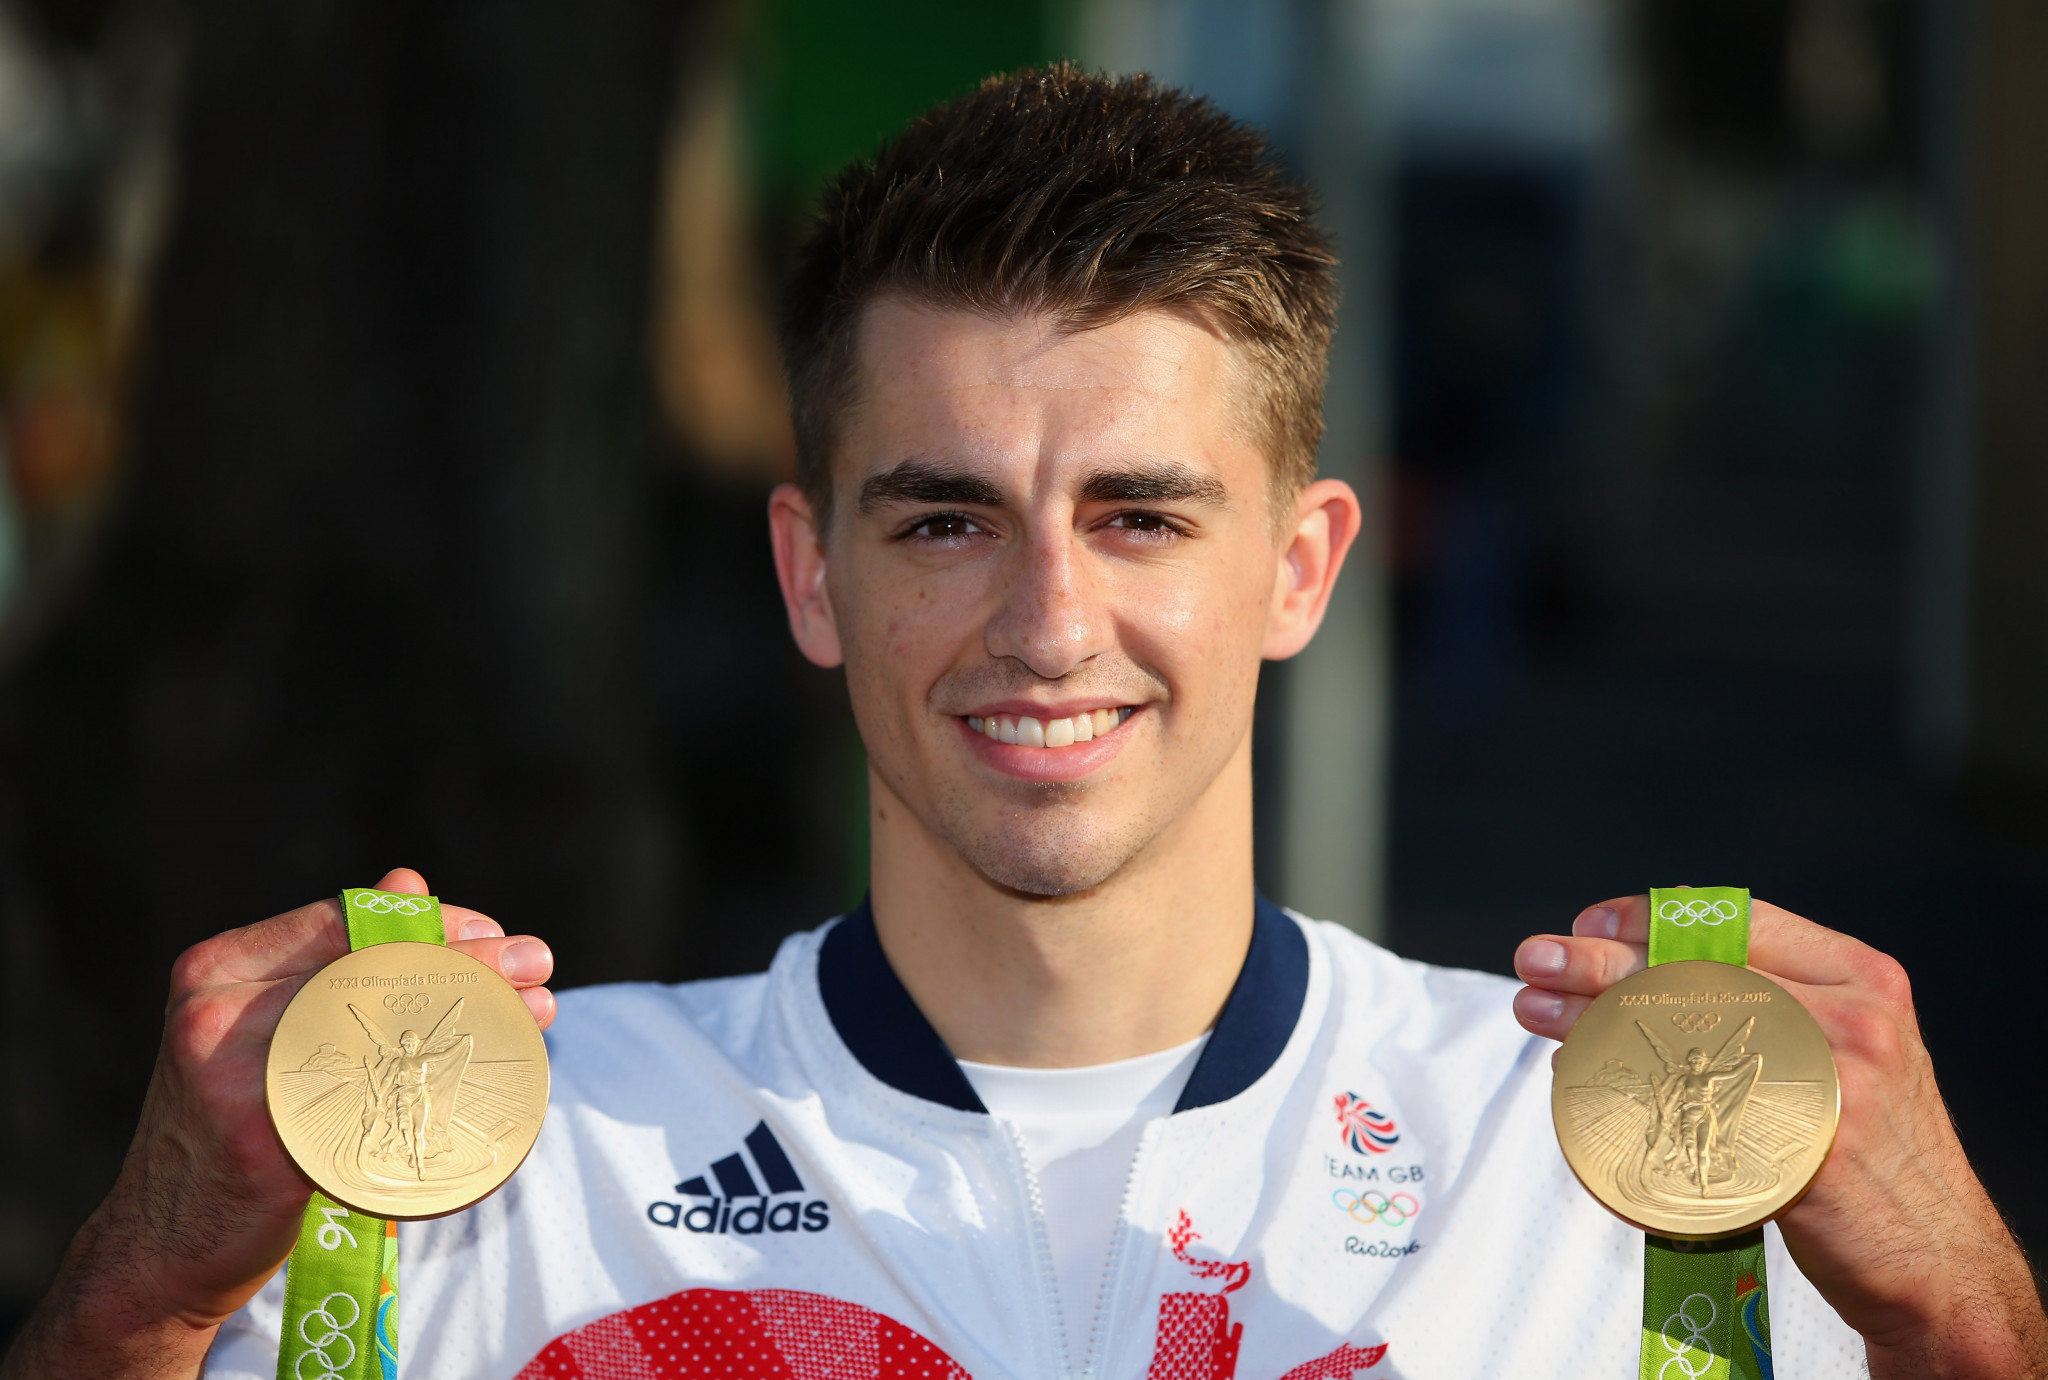 Double Olympic Champion Max Whitlock will compete at the event on March 23 2019 ©Getty Images